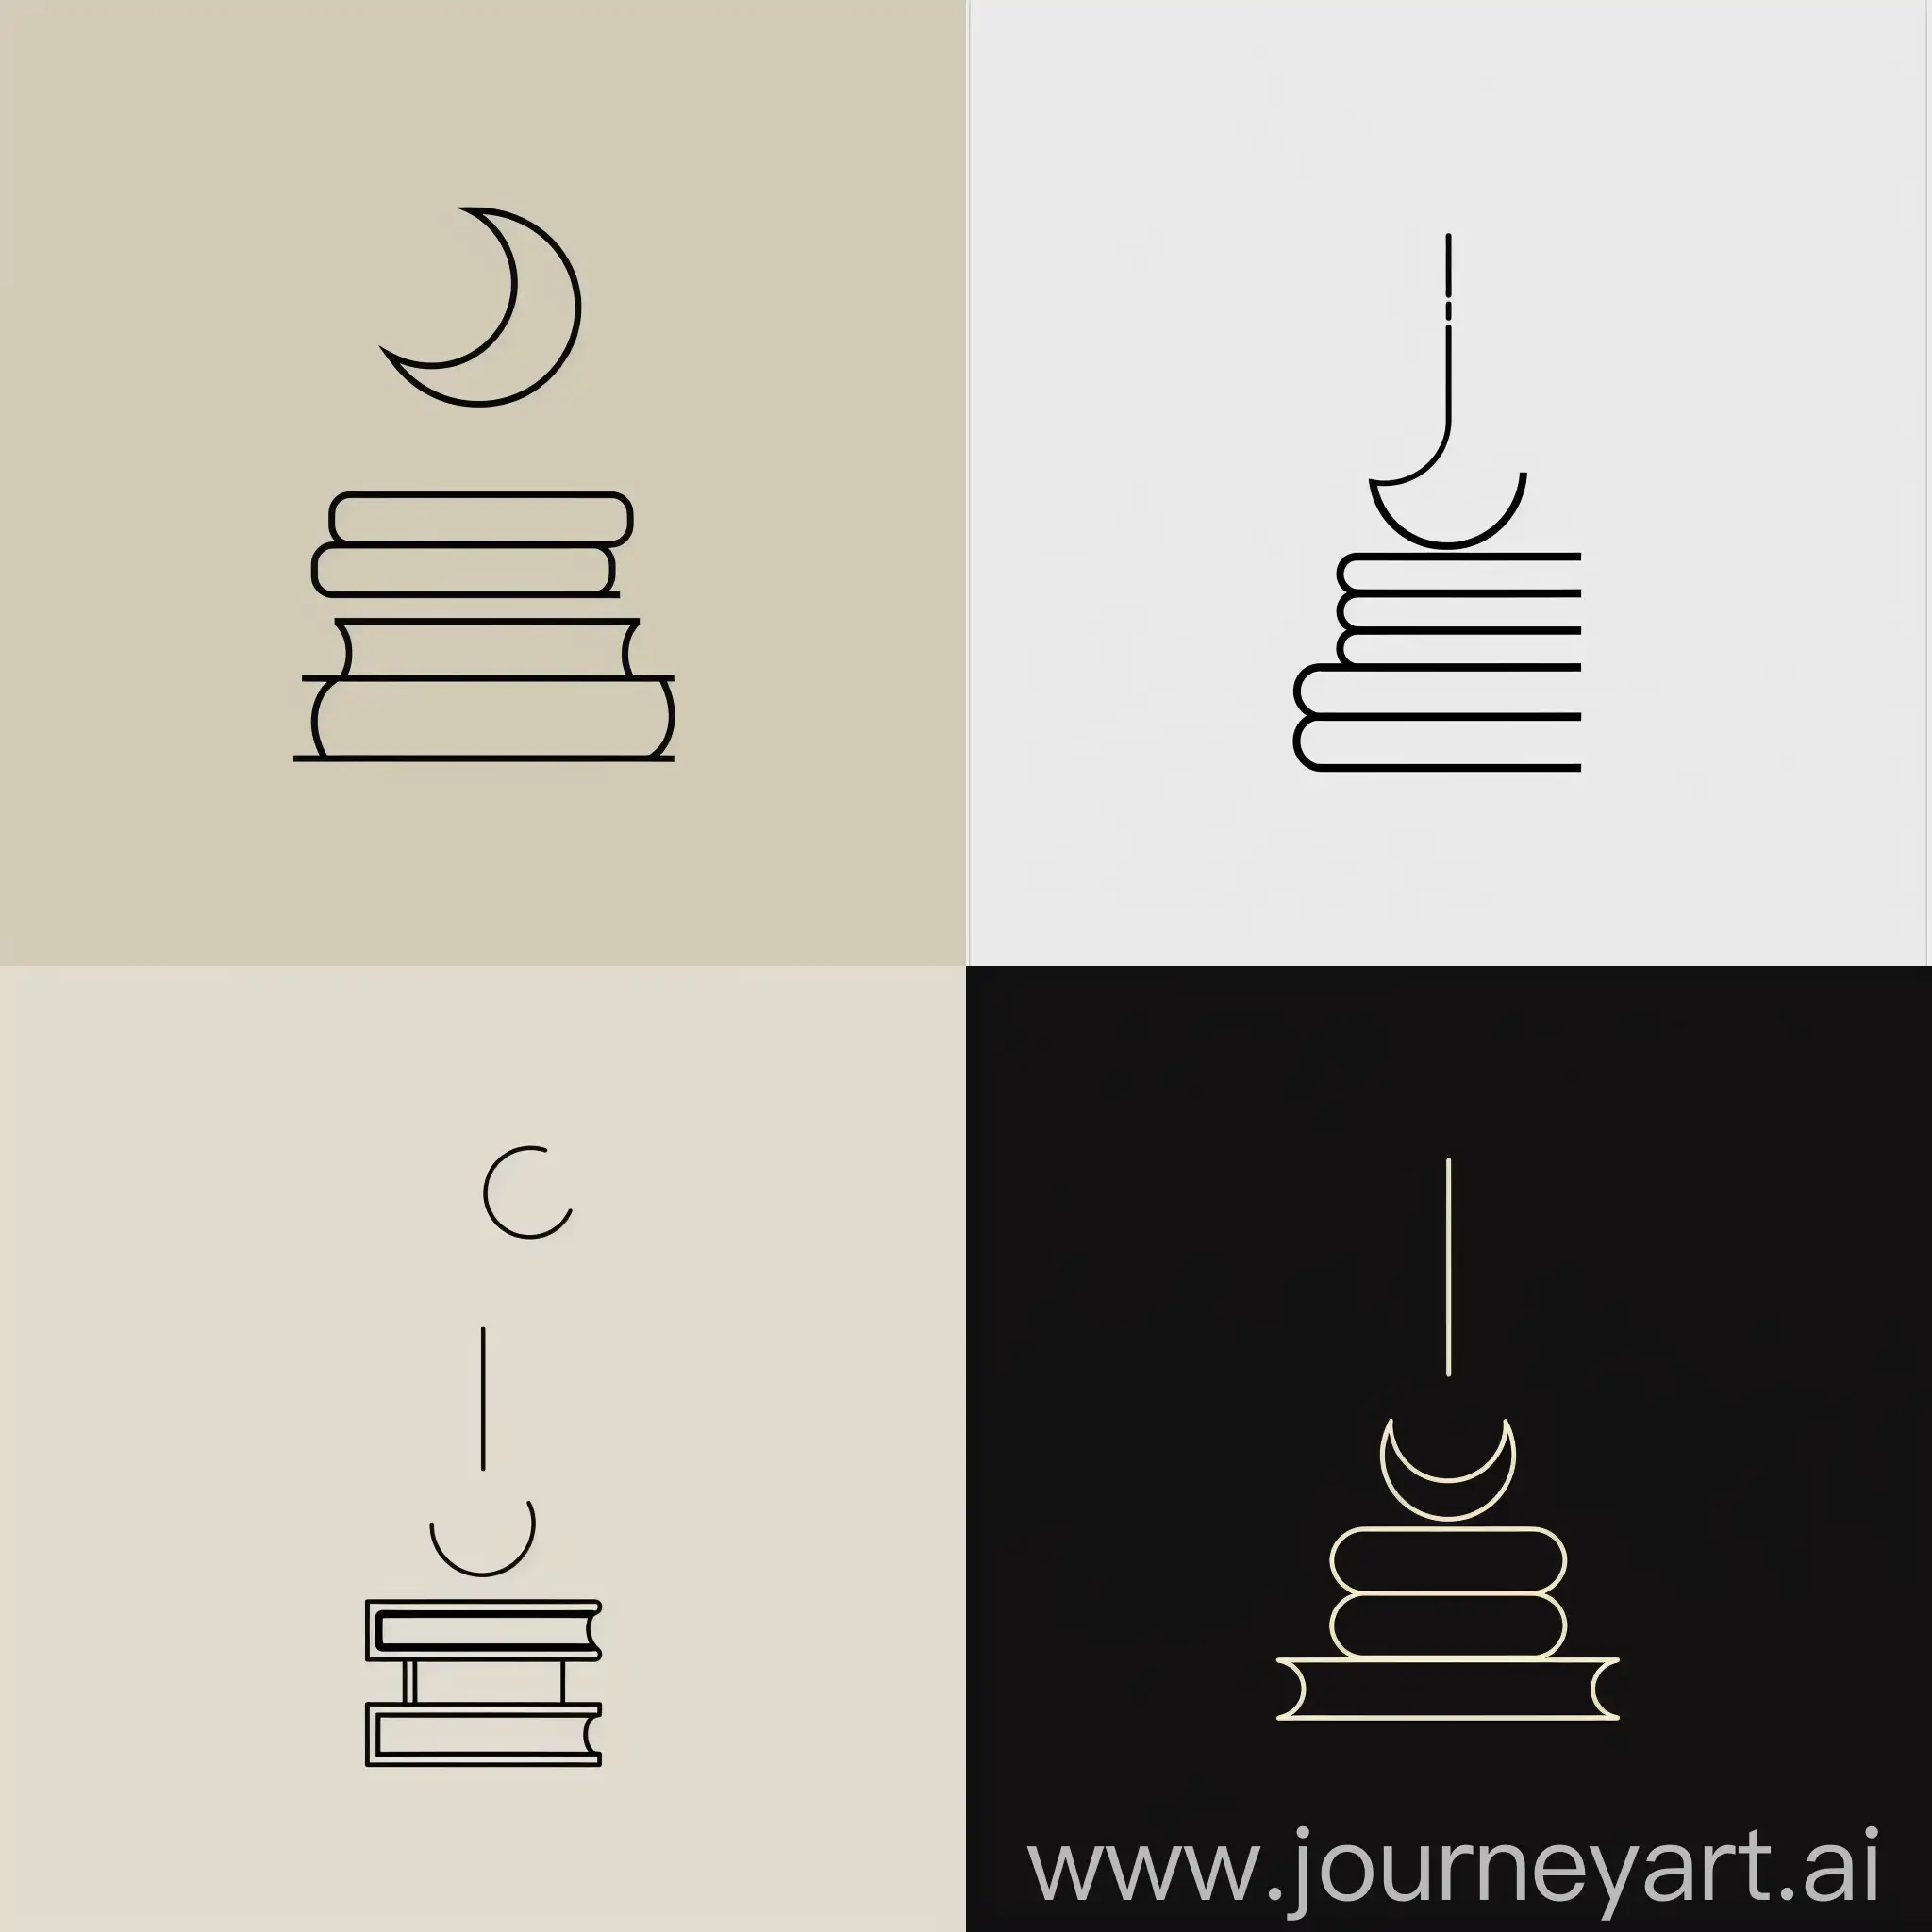 Imagine a minimalist logo using just lines and shapes. A simple outline of three stacked books forms the base. Above the books, a thin crescent moon hangs, representing dreams.